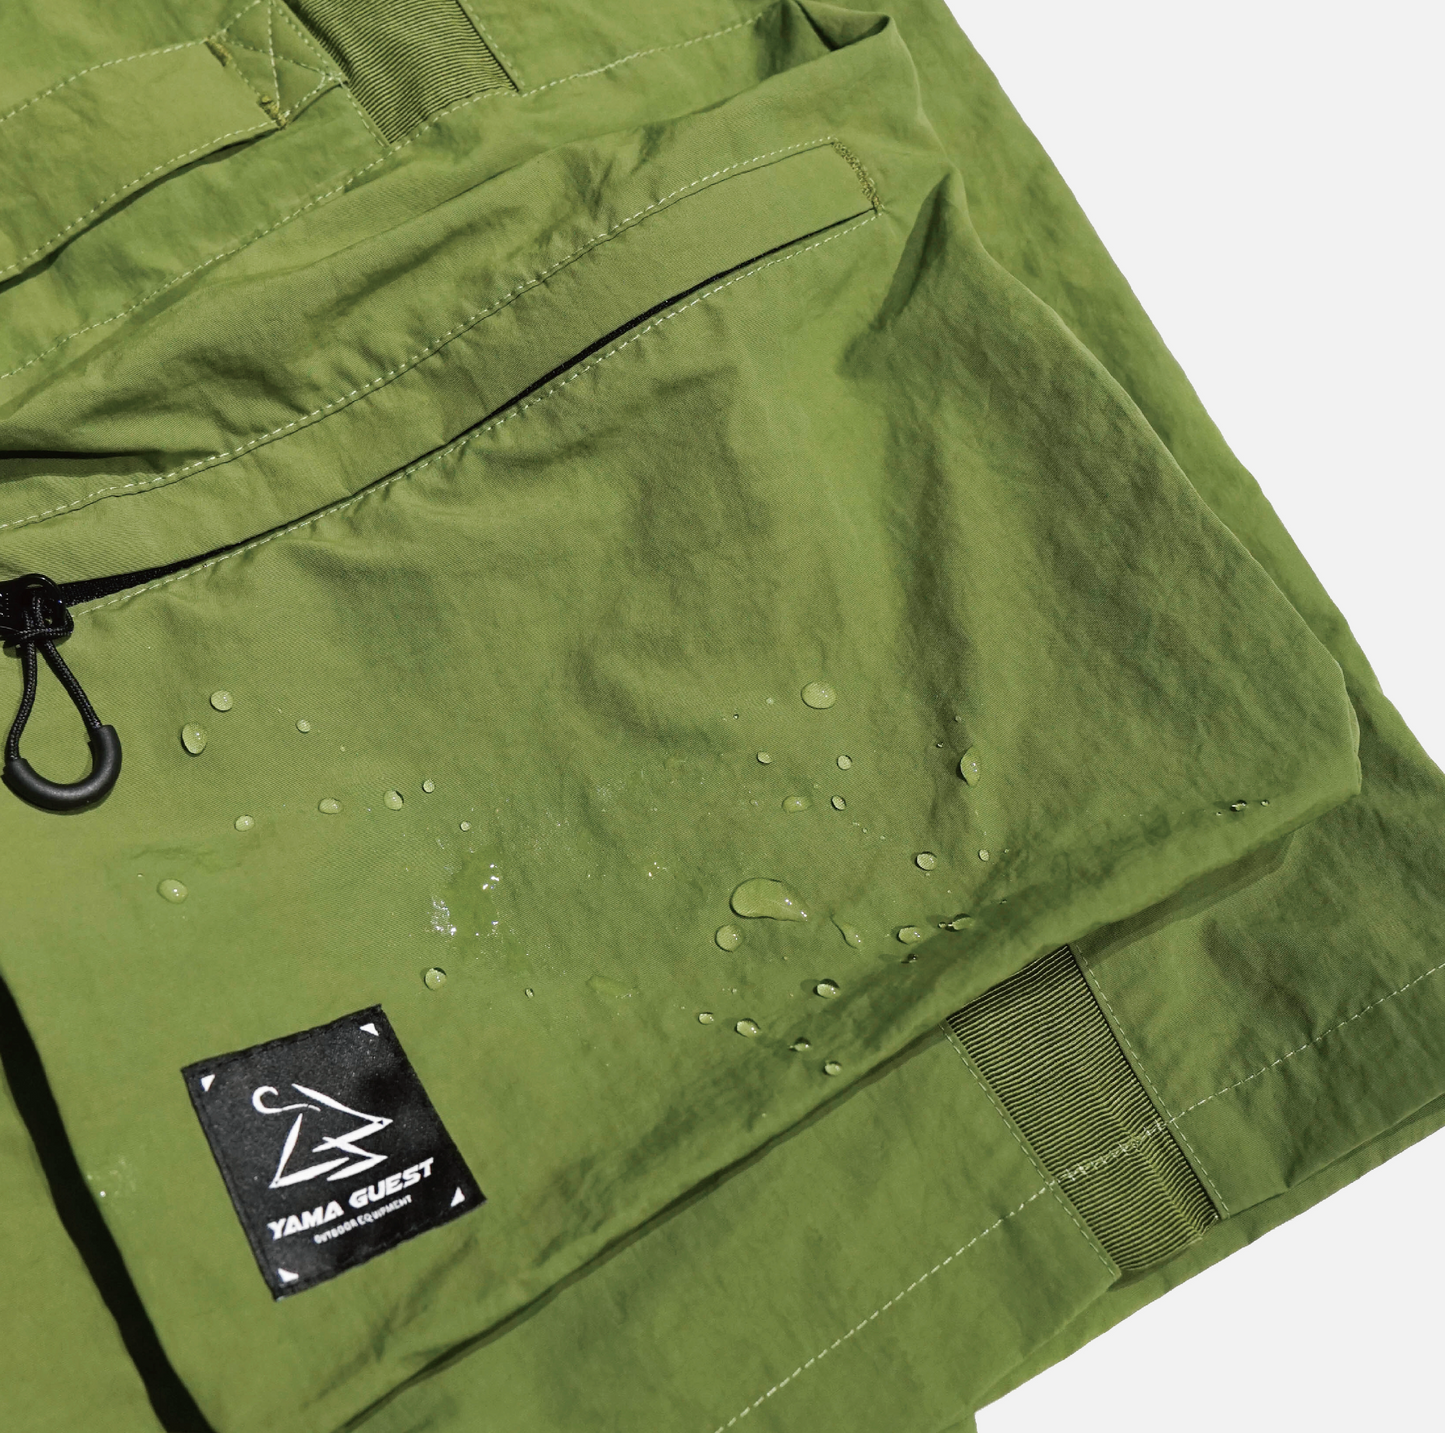 SP06 Water-Resistant Multi Pockets Shorts (GRN)